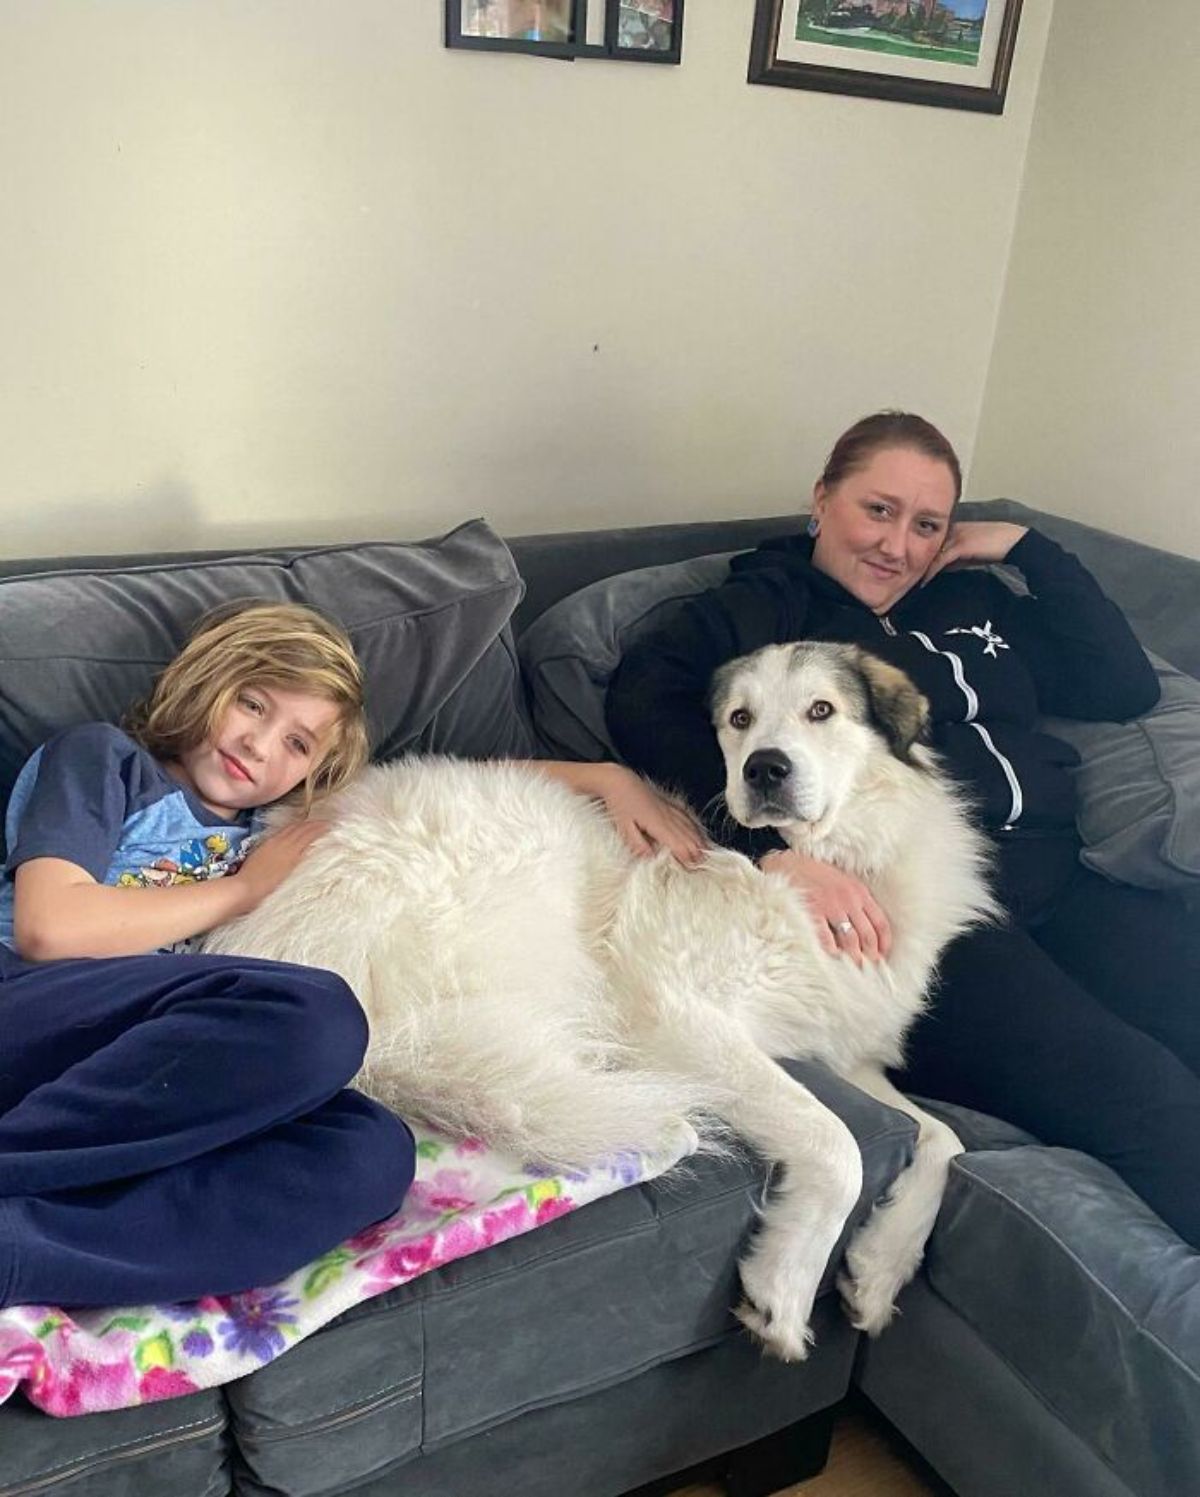 large fluffy white and black dog laying on a grey sofa with the ehad against a woman and a child at the other end